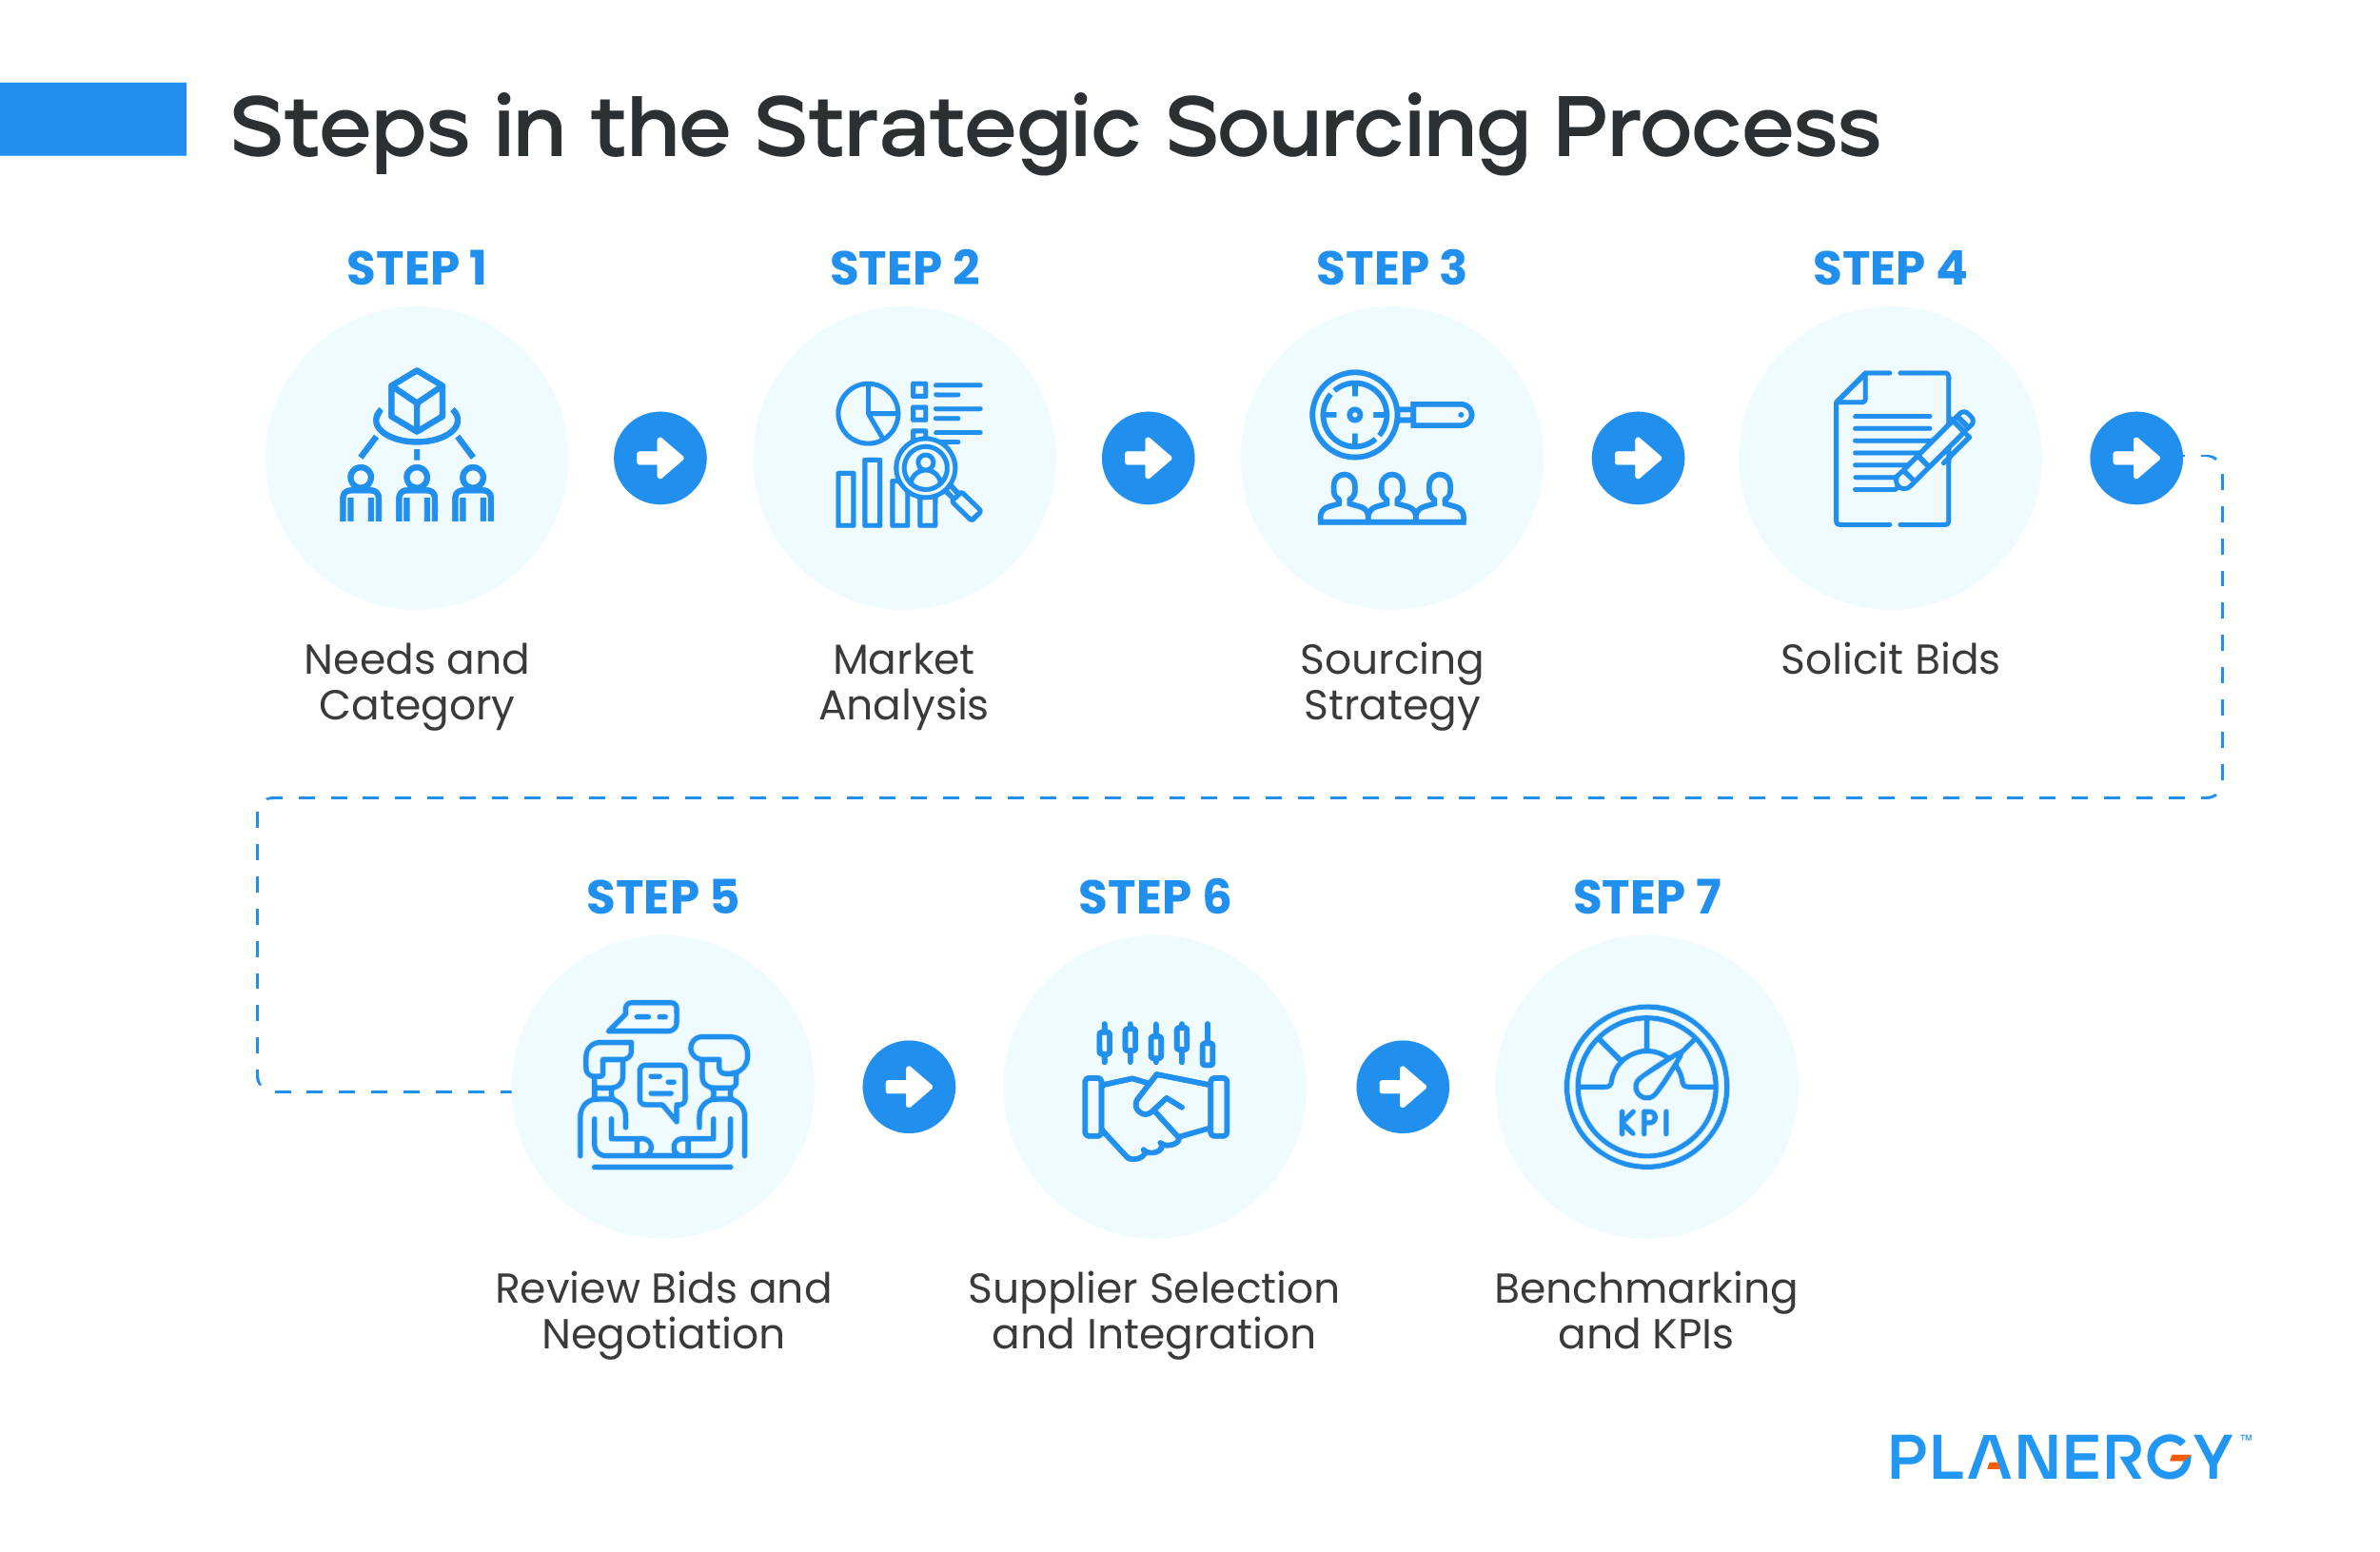 Steps in Strategic Sourcing Process